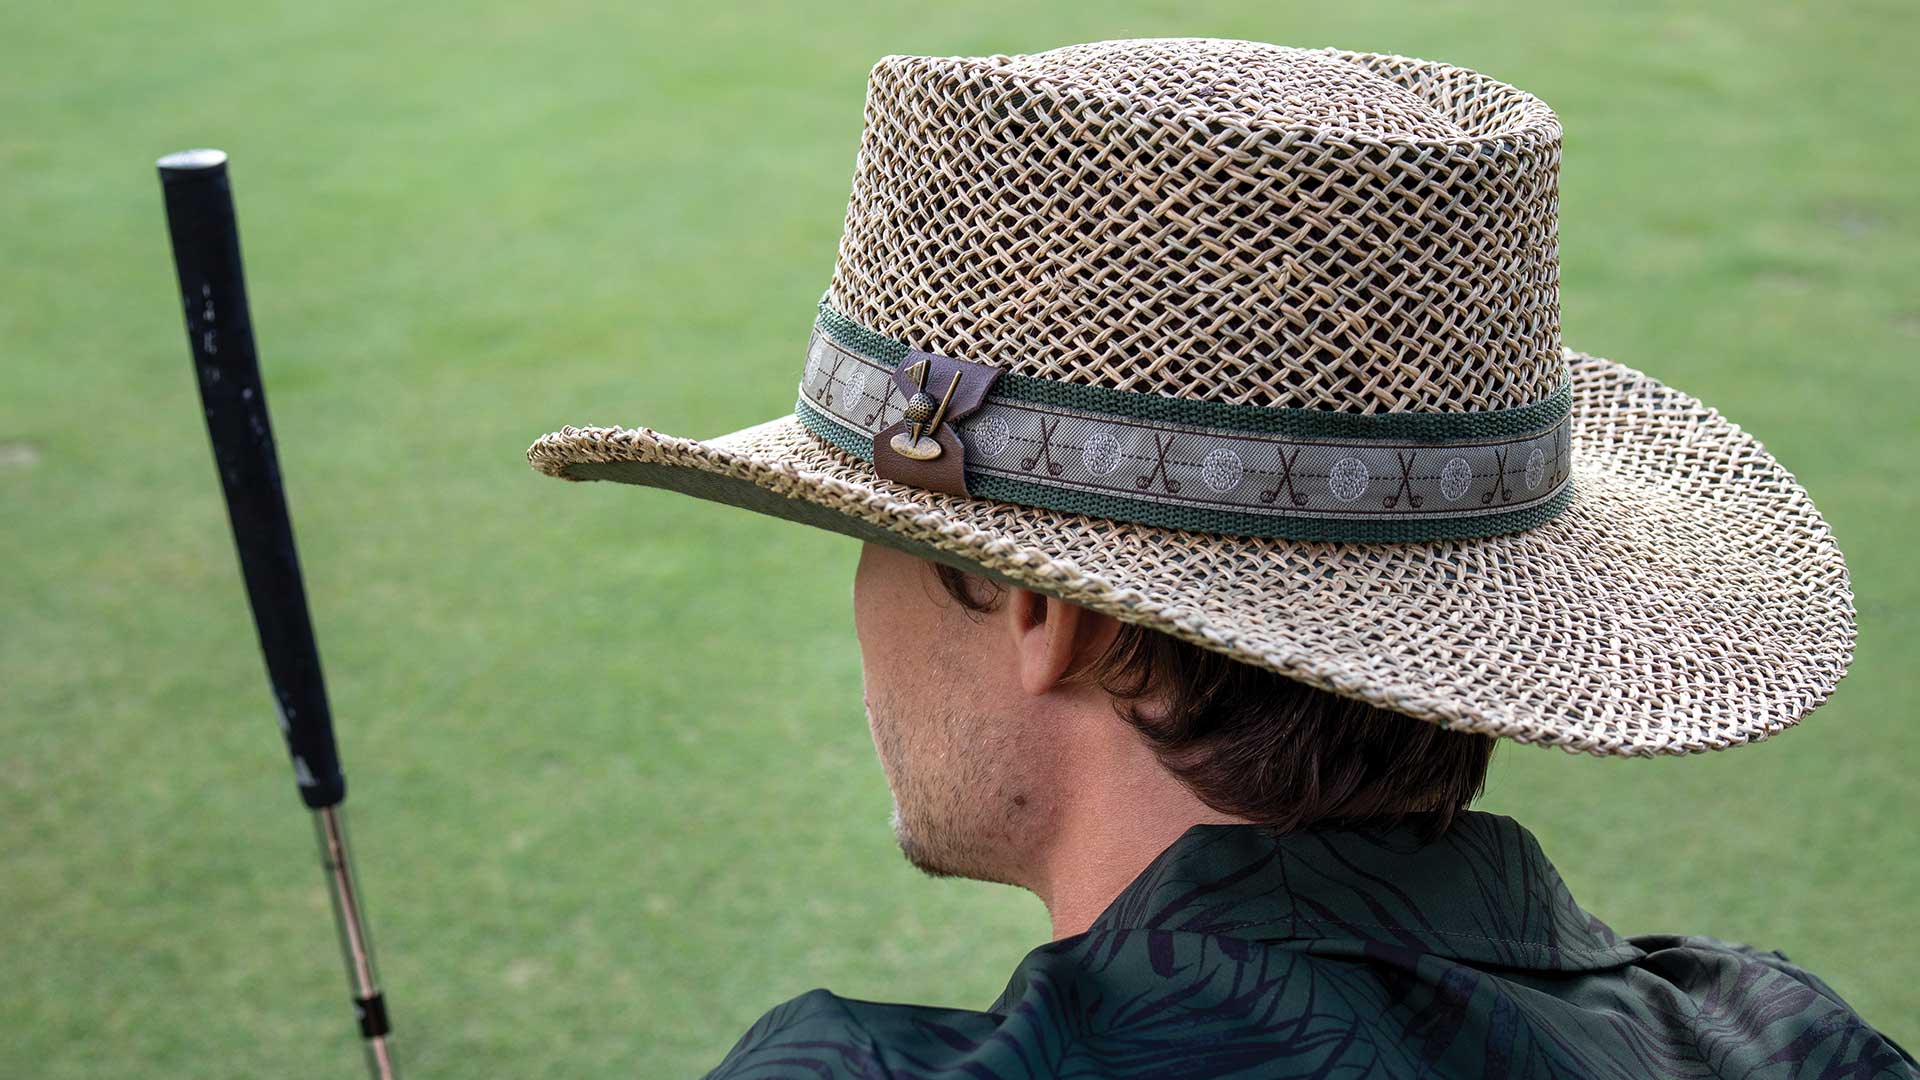 Man wearing straw hat with golf club and golf ball pattern while carrying a putter.